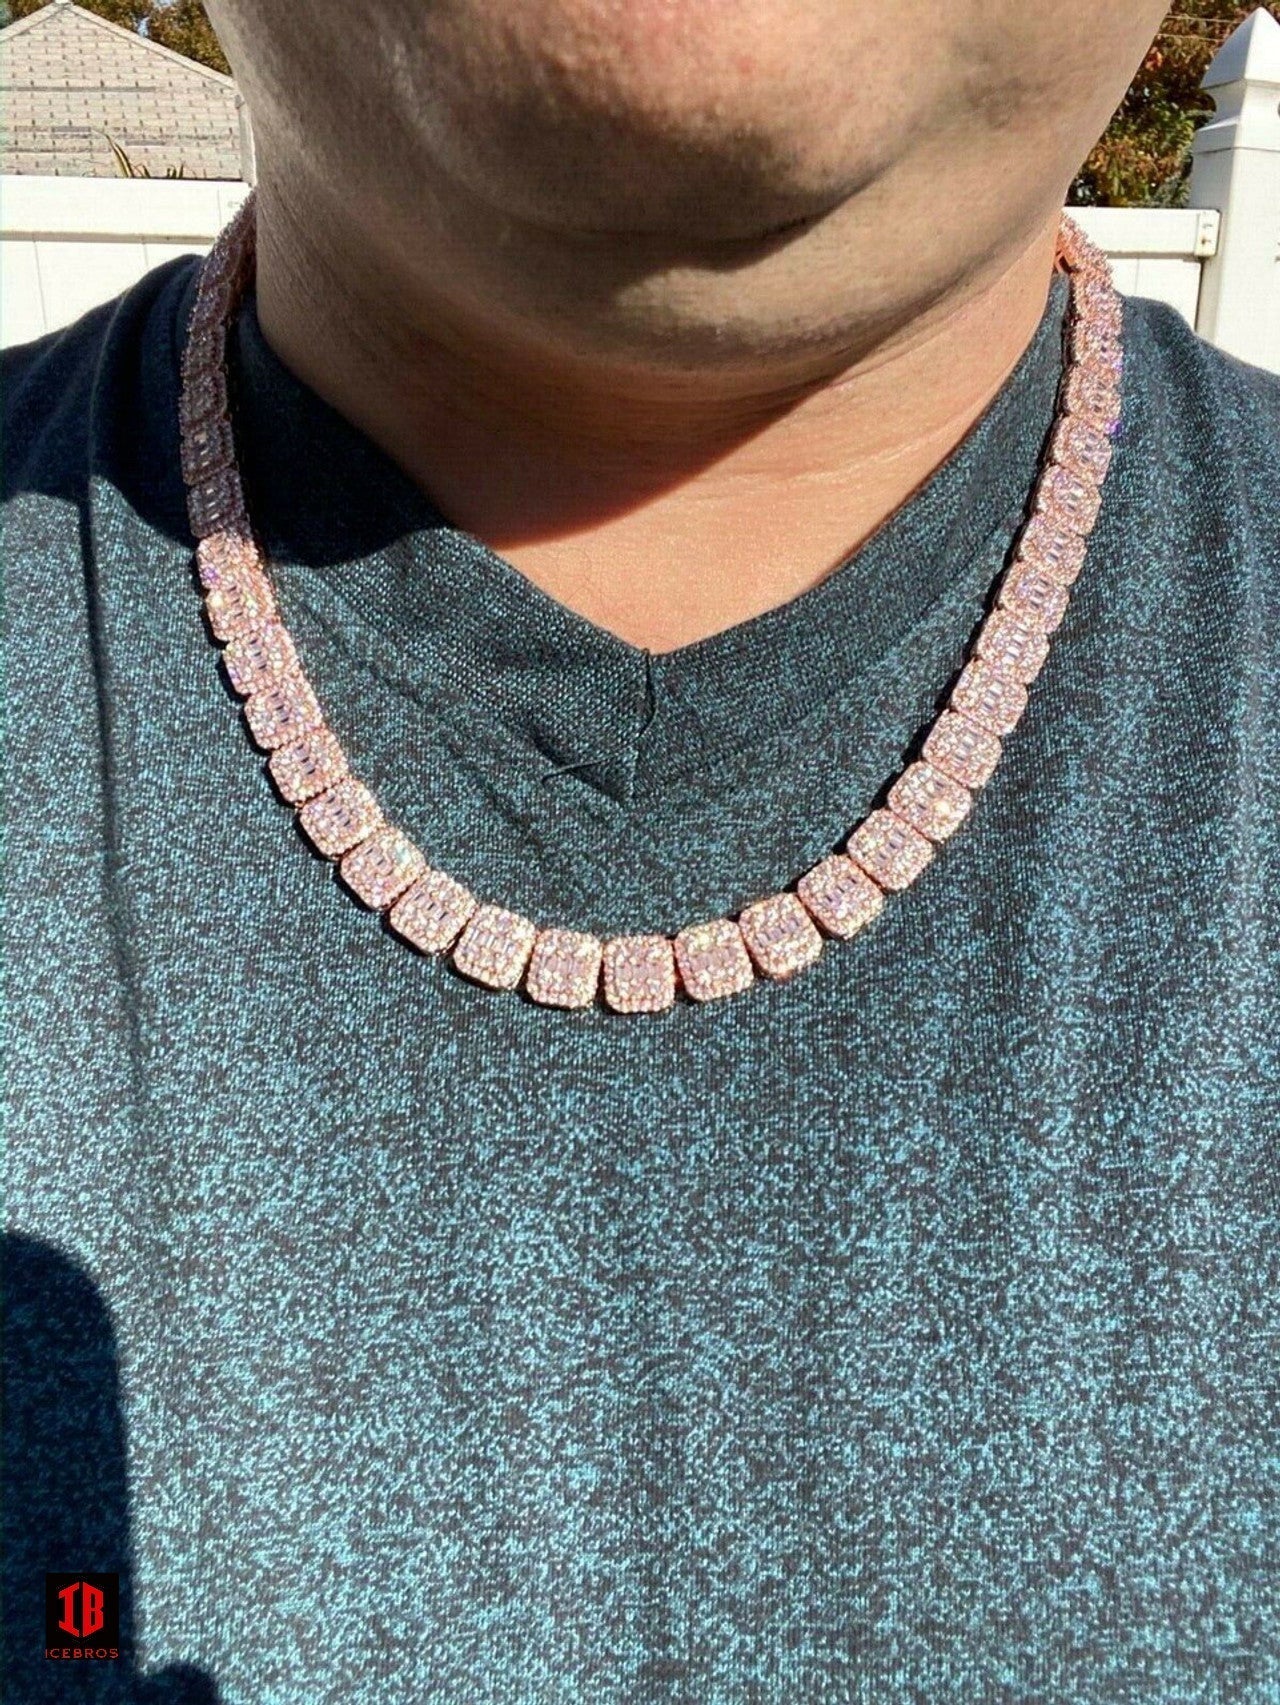 Men's Paved 11mm Baguette Tennis Chain Rose Gold Over Real 925 Silver 18" Choker - 30" (WHITE GOLD)